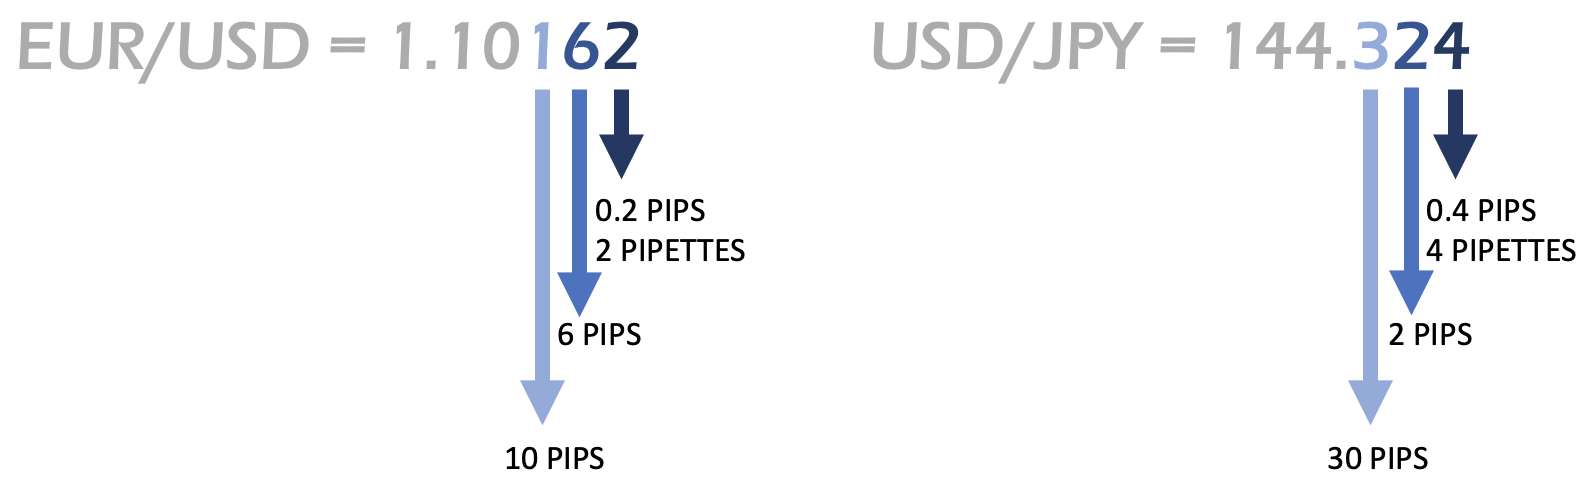 Value of pipettes in various currency pairs